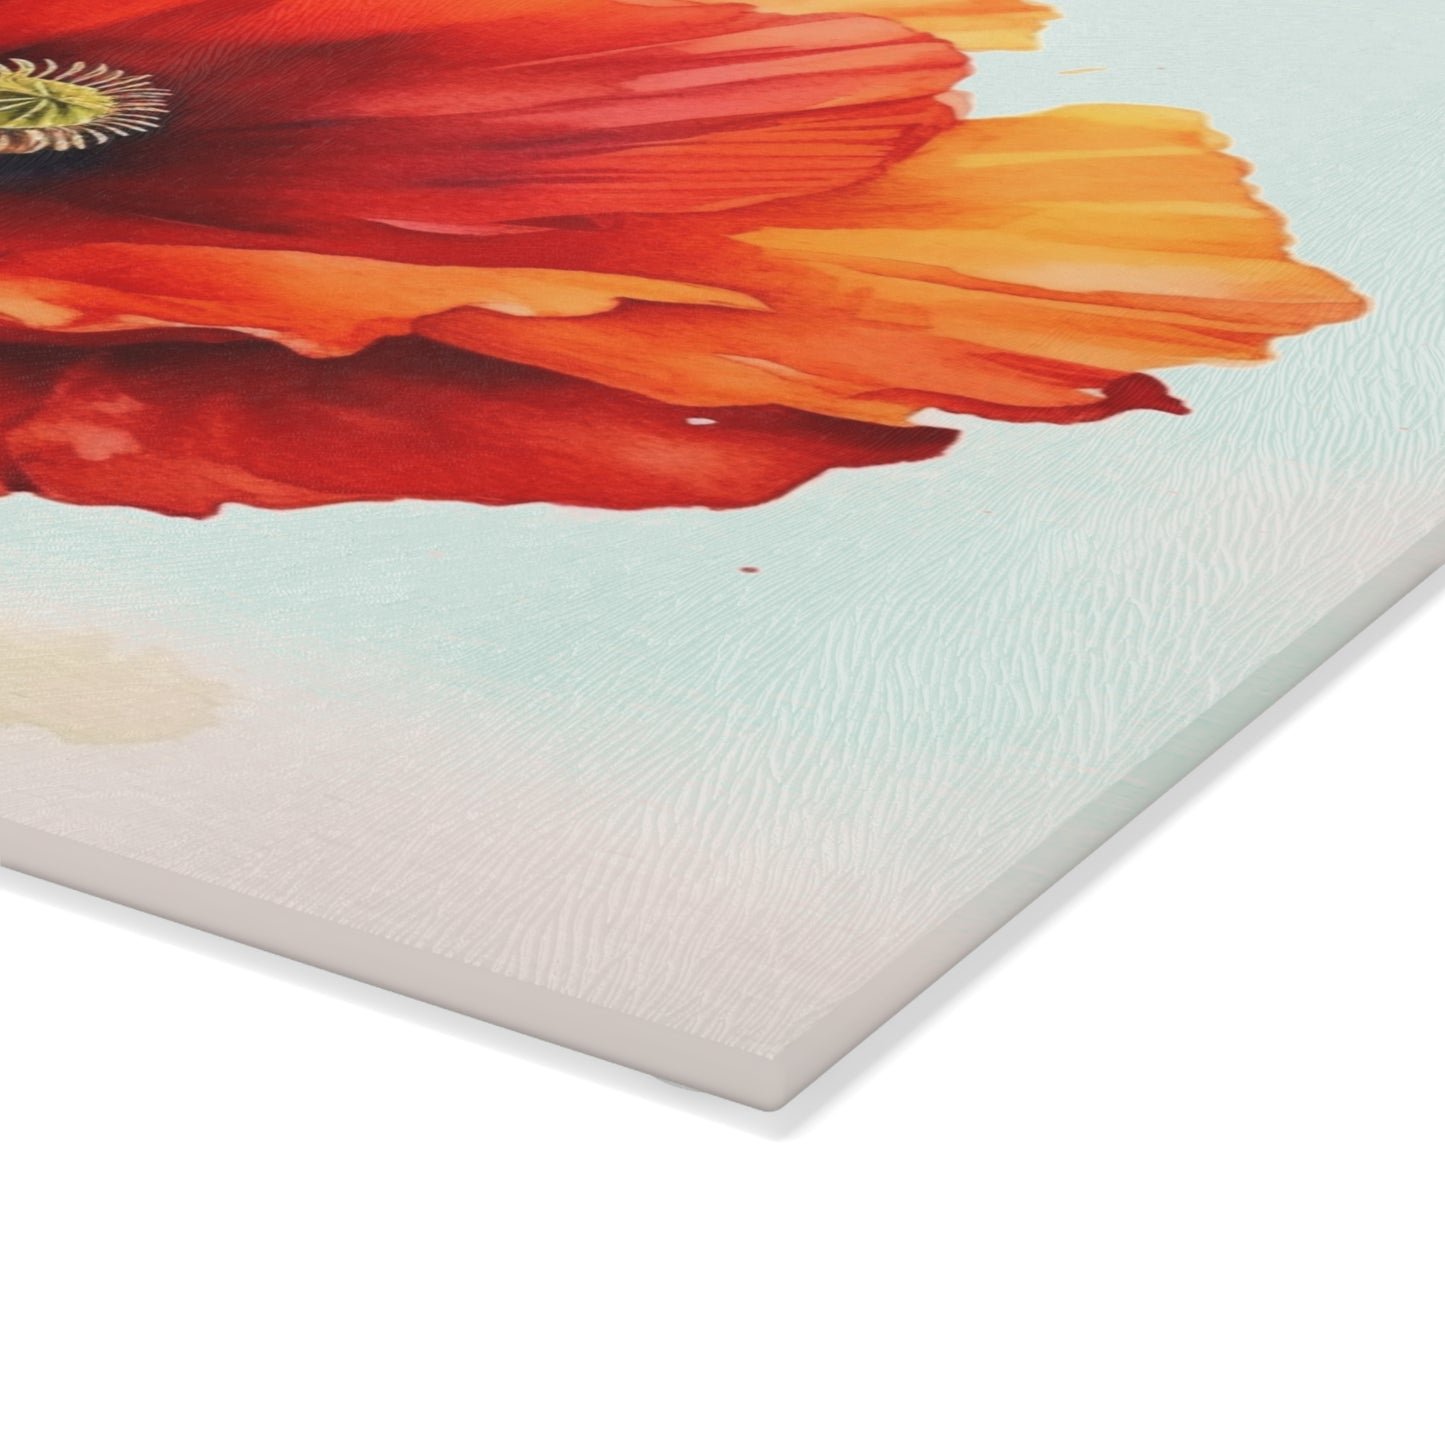 Stunning Poppy Flower Watercolor Glass Cutting Board: A Blossoming Experience